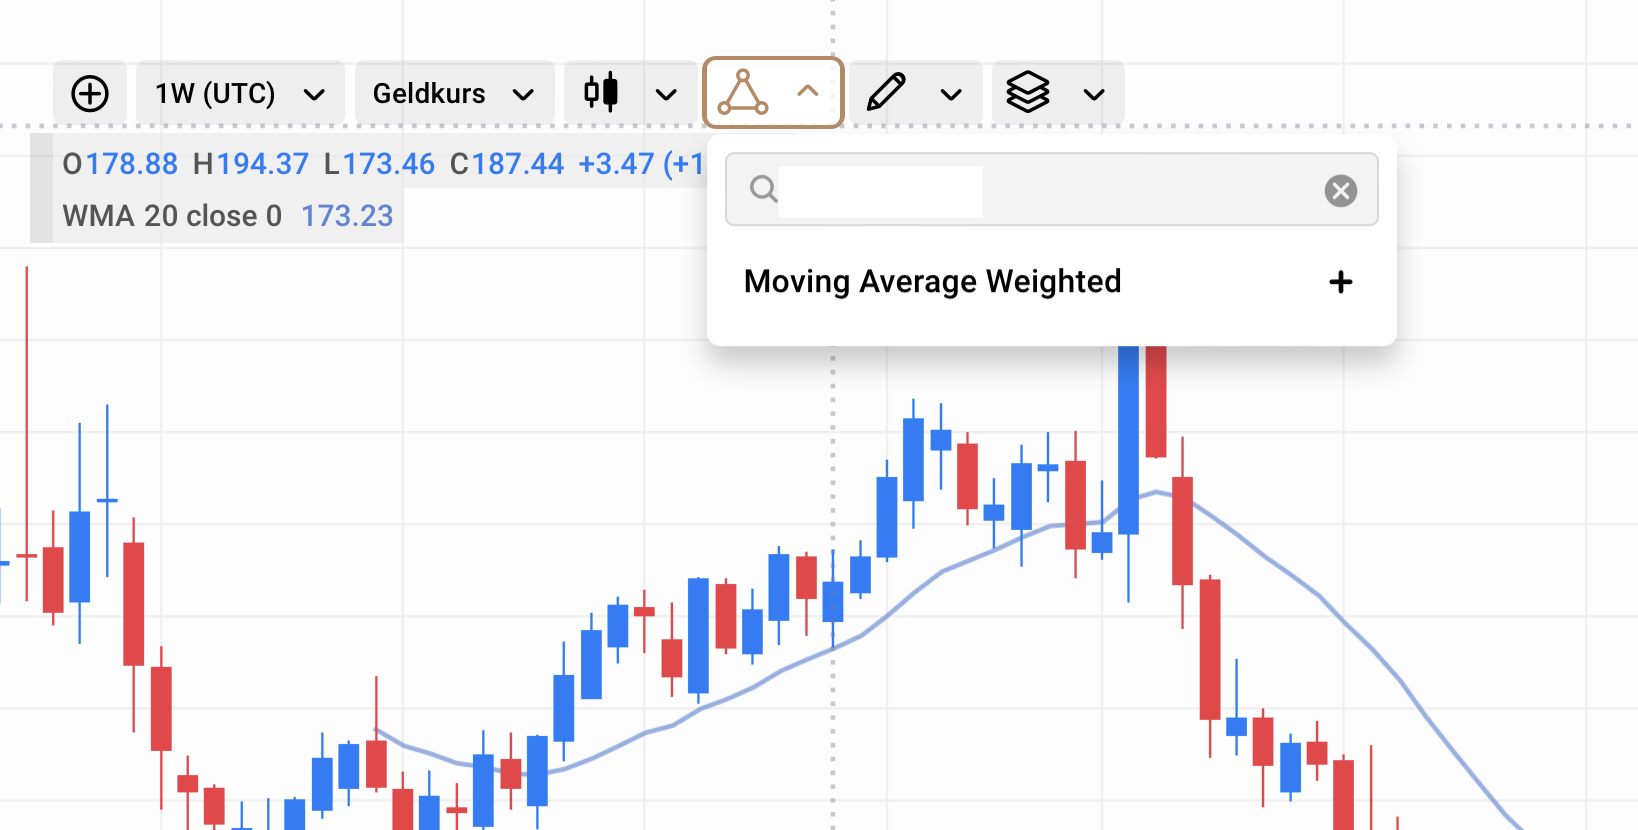 Moving Average Weighted